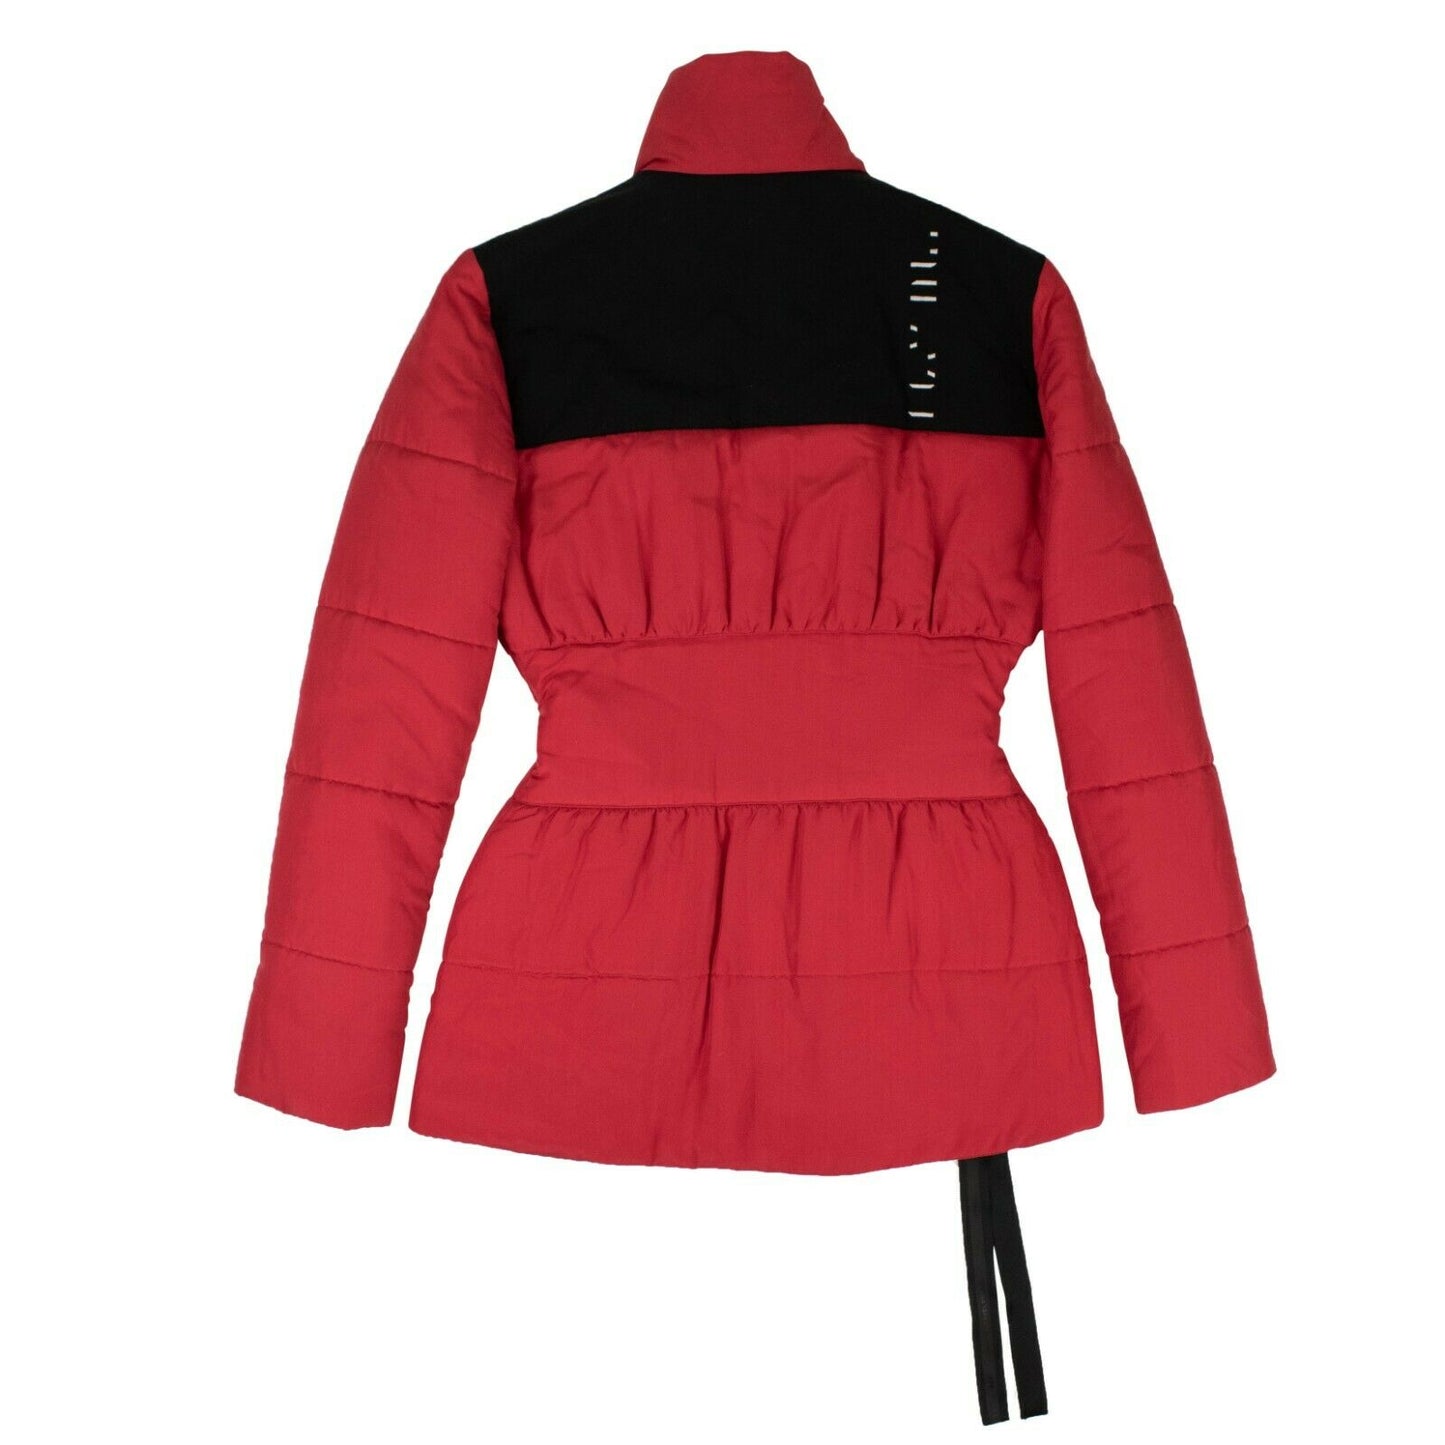 Unravel Project Drawstring Waist Puffer Jacket - Red